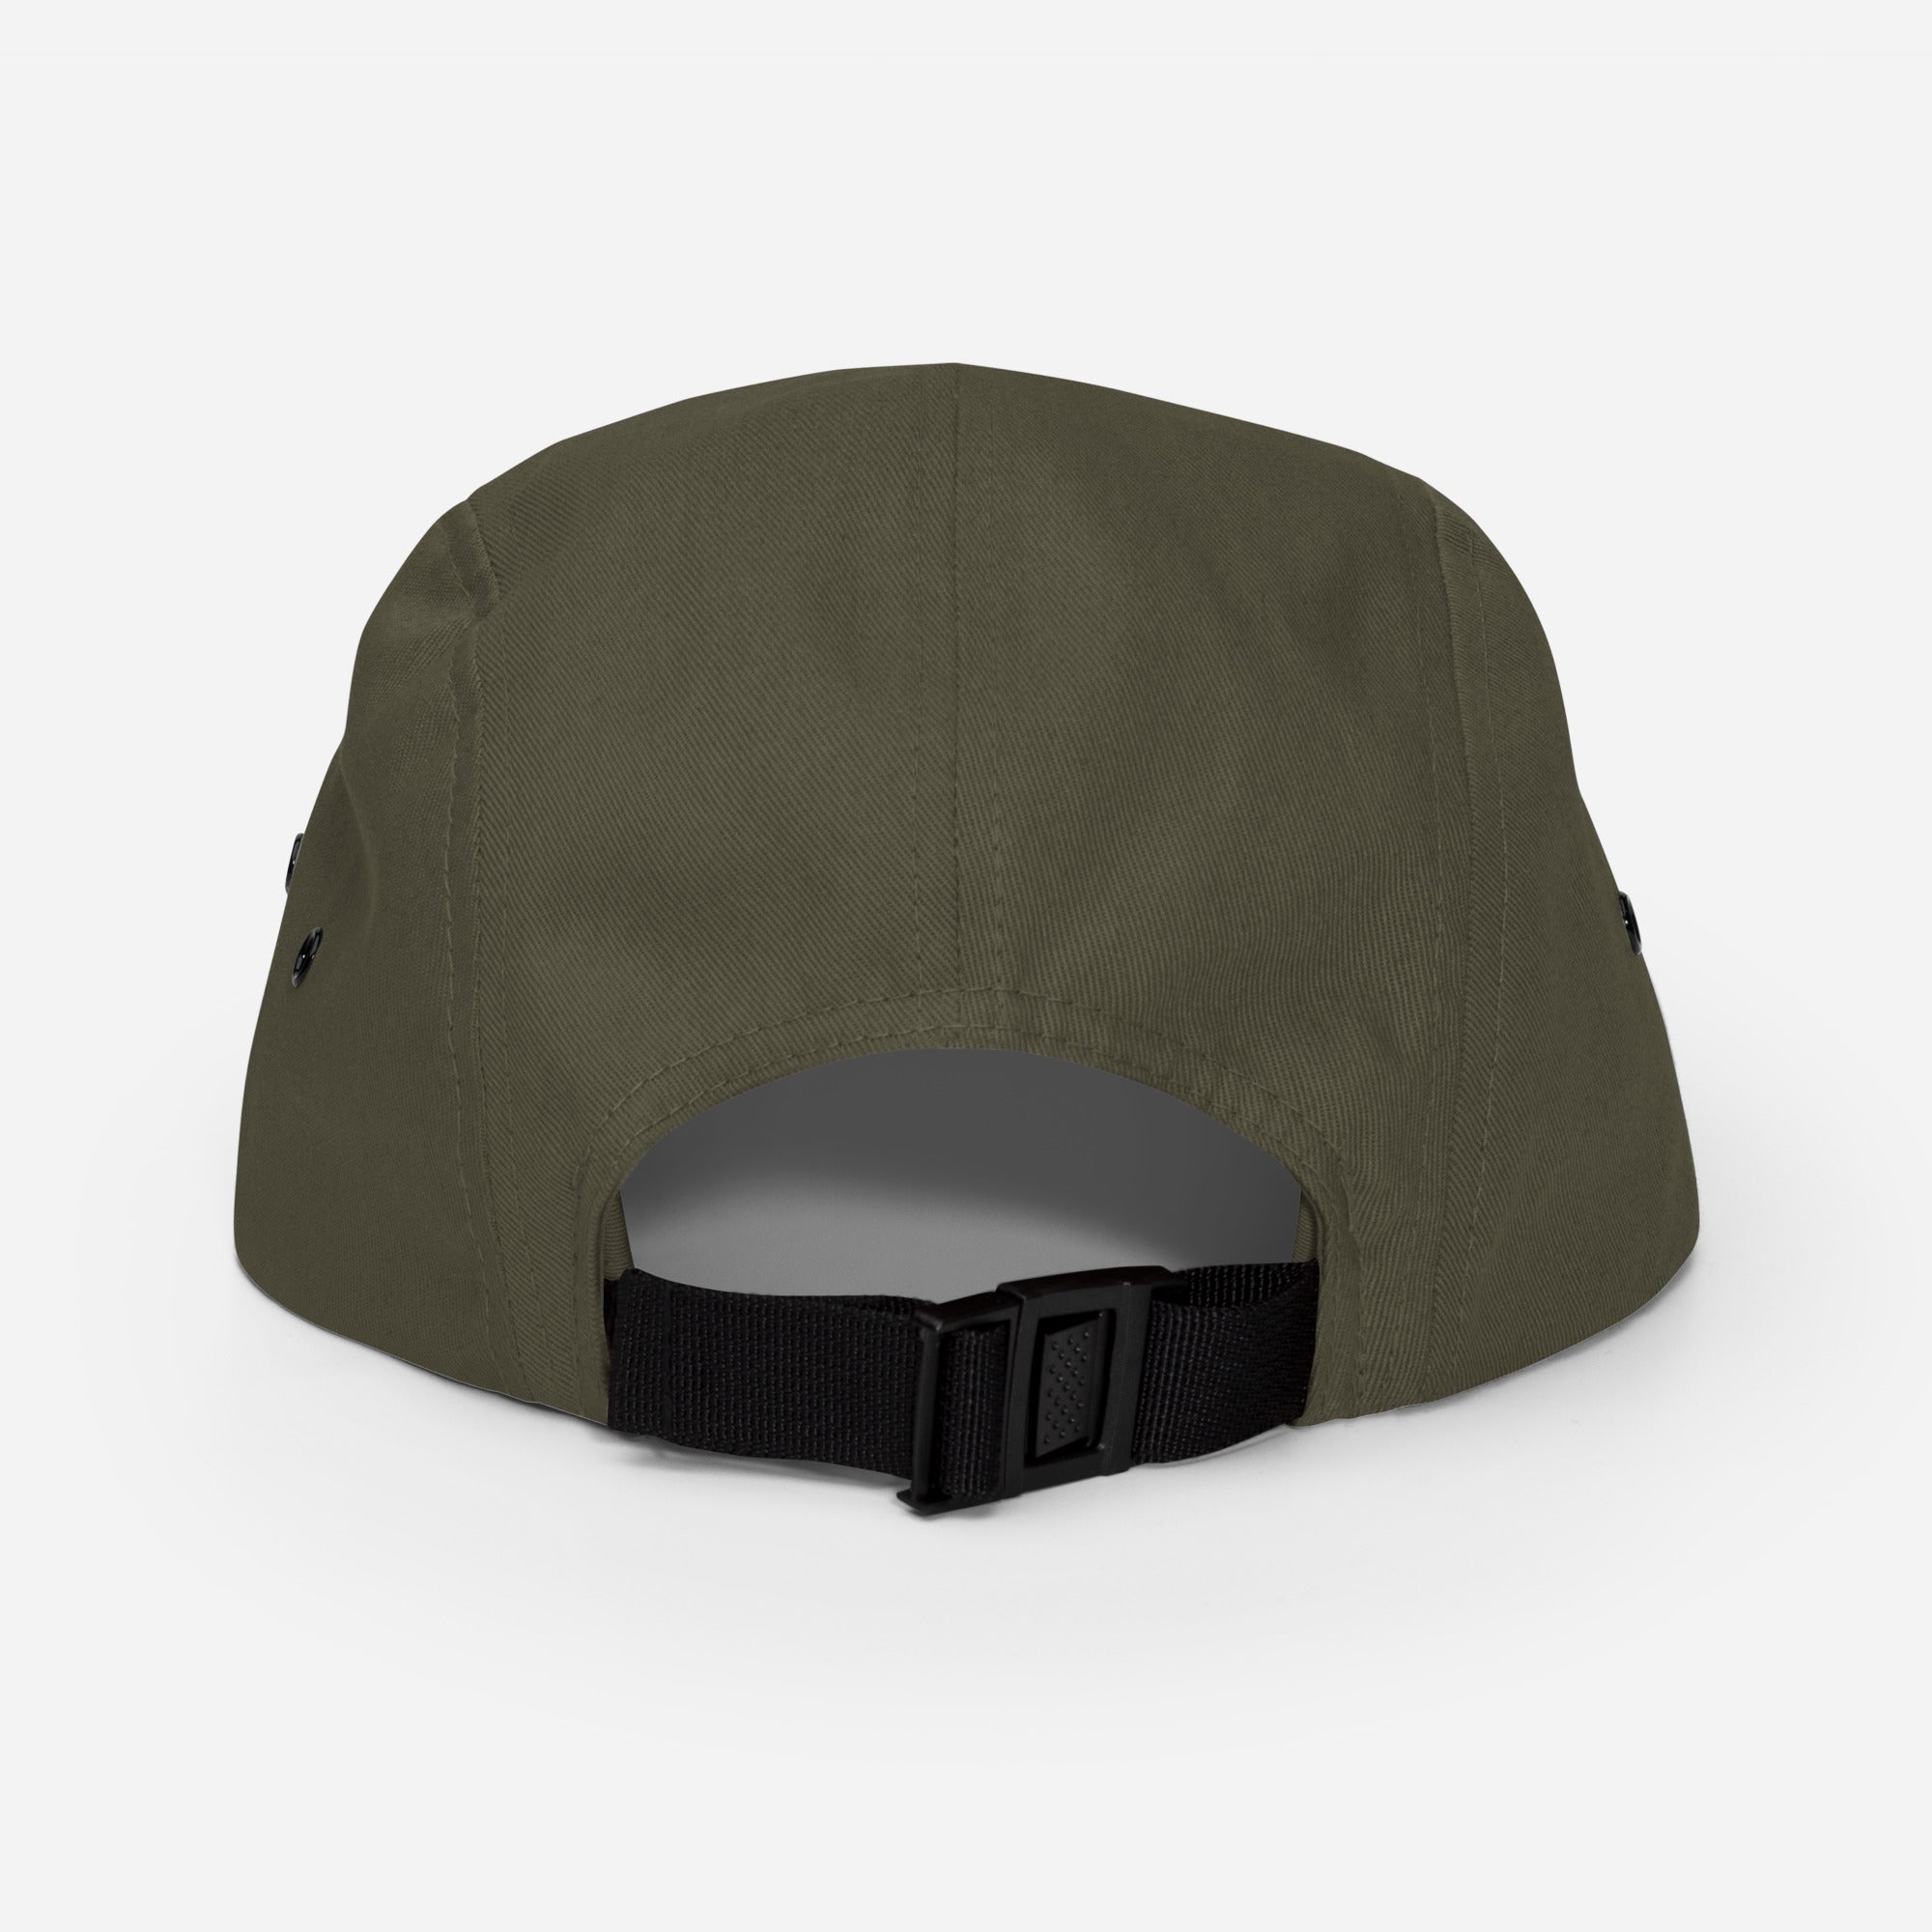 Loyal to Few Ruled By None Five Panel Camper Cap